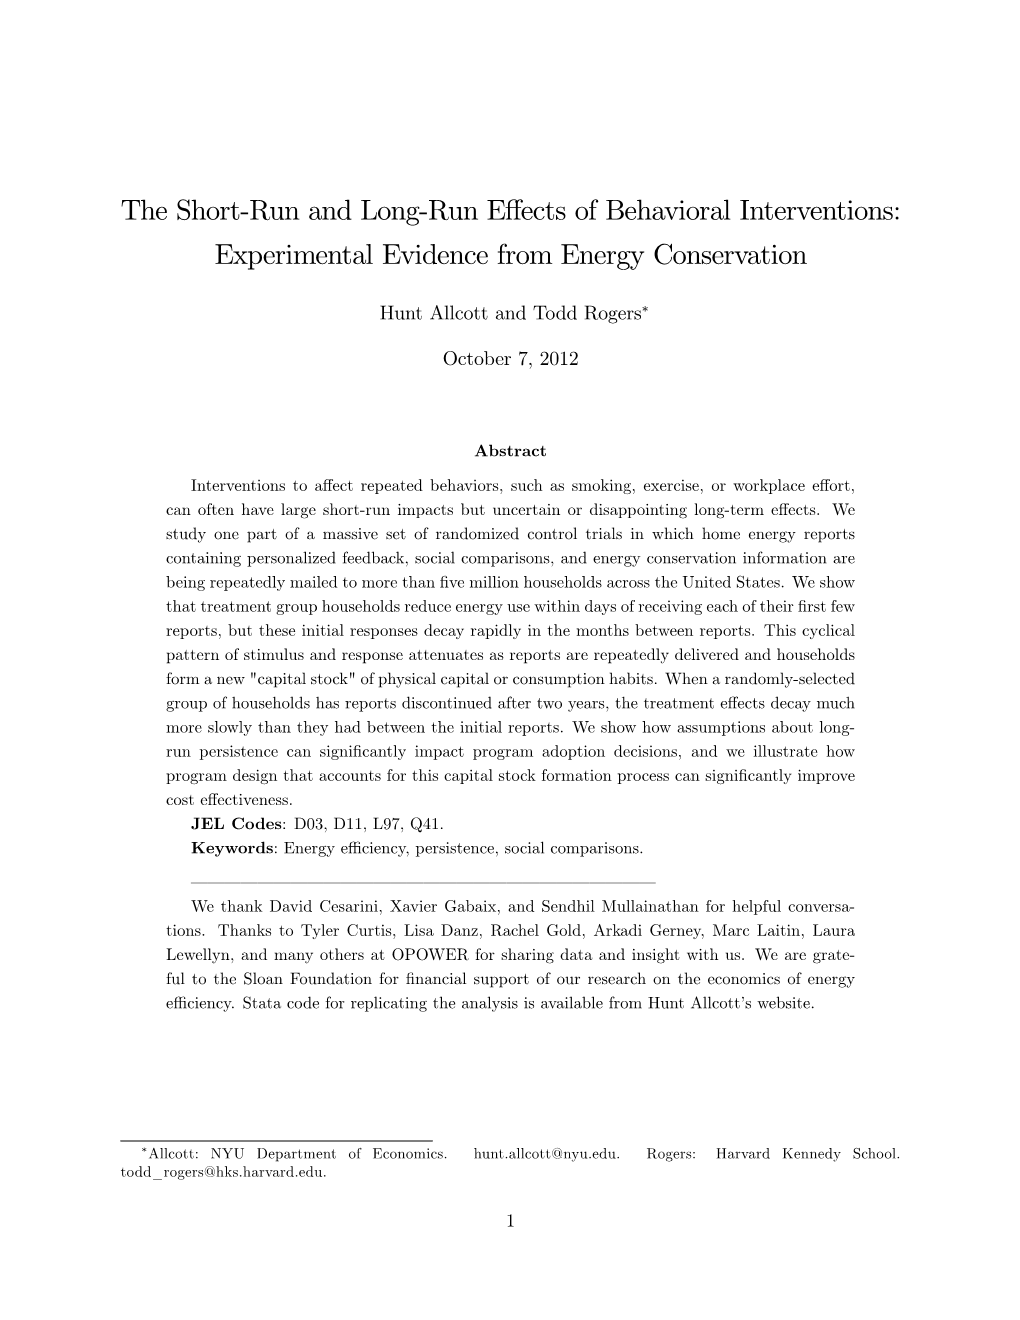 The Short(Run and Long(Run Effects of Behavioral